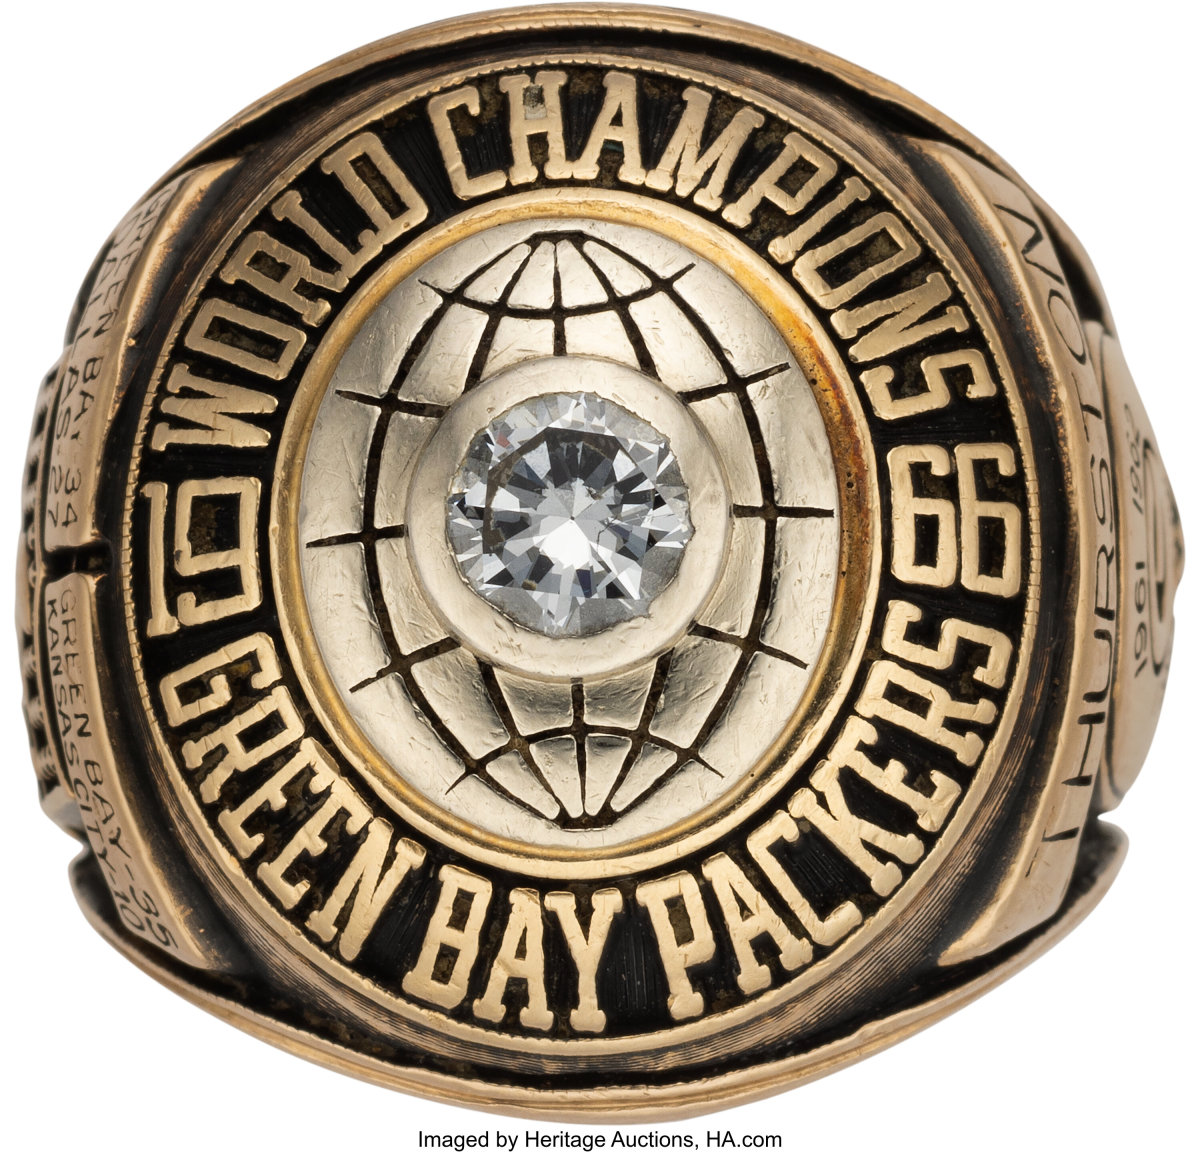 1967 Green Bay Packers Super Bowl ring owned by offensive lineman "Fuzzy" Thurston.